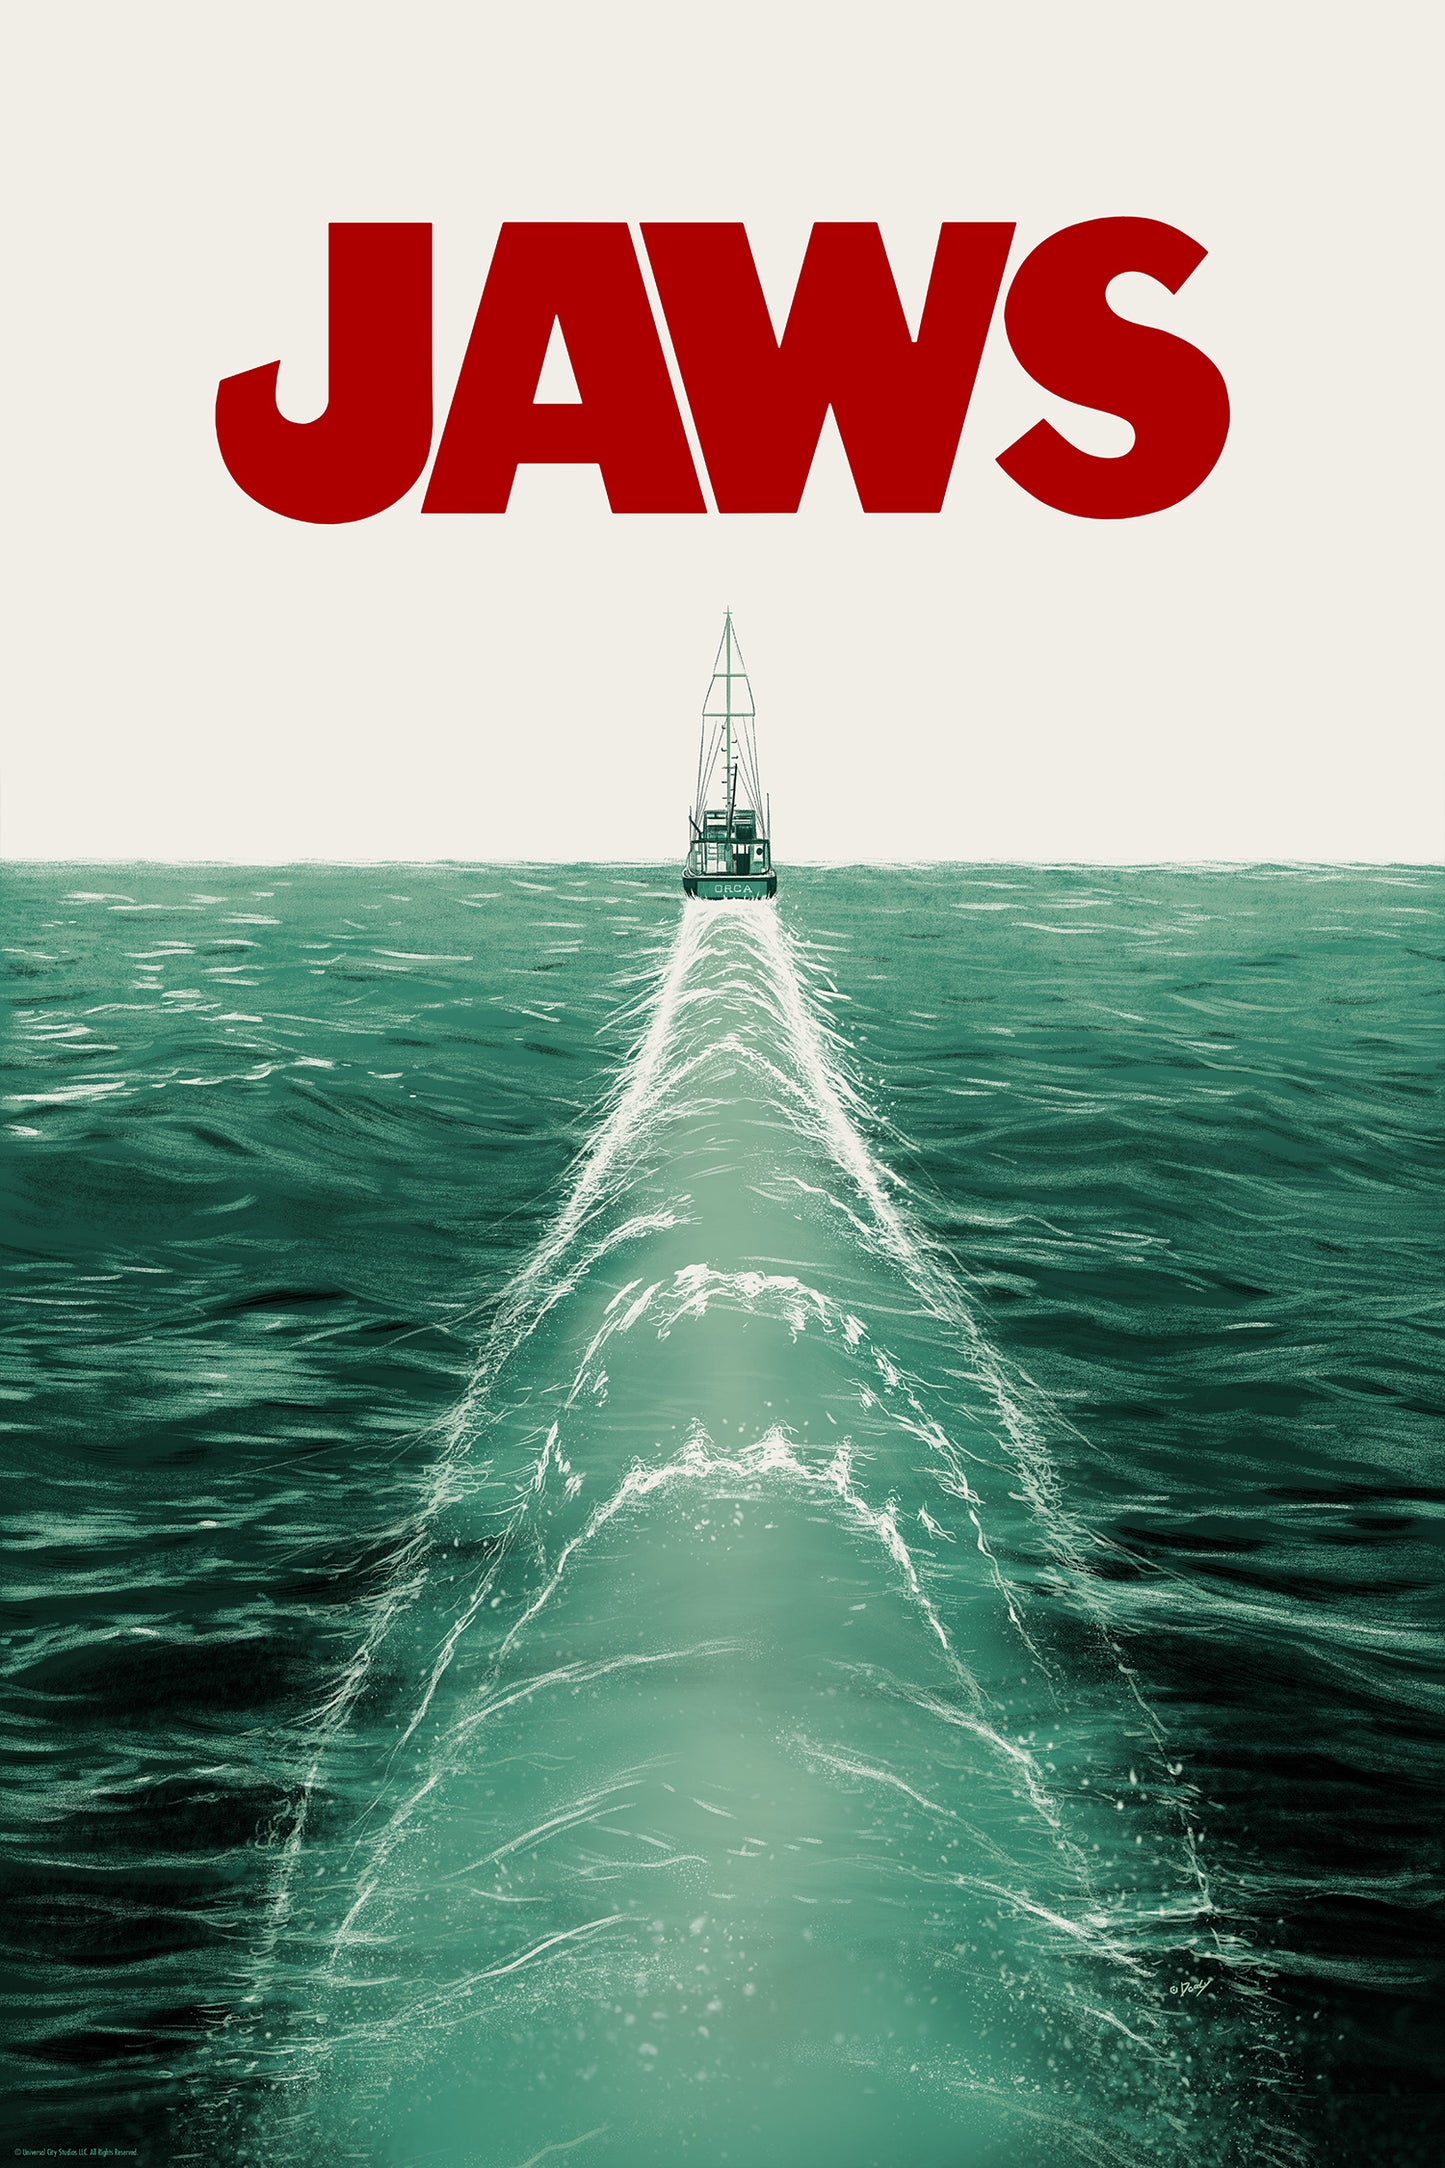 Doaly "JAWS"